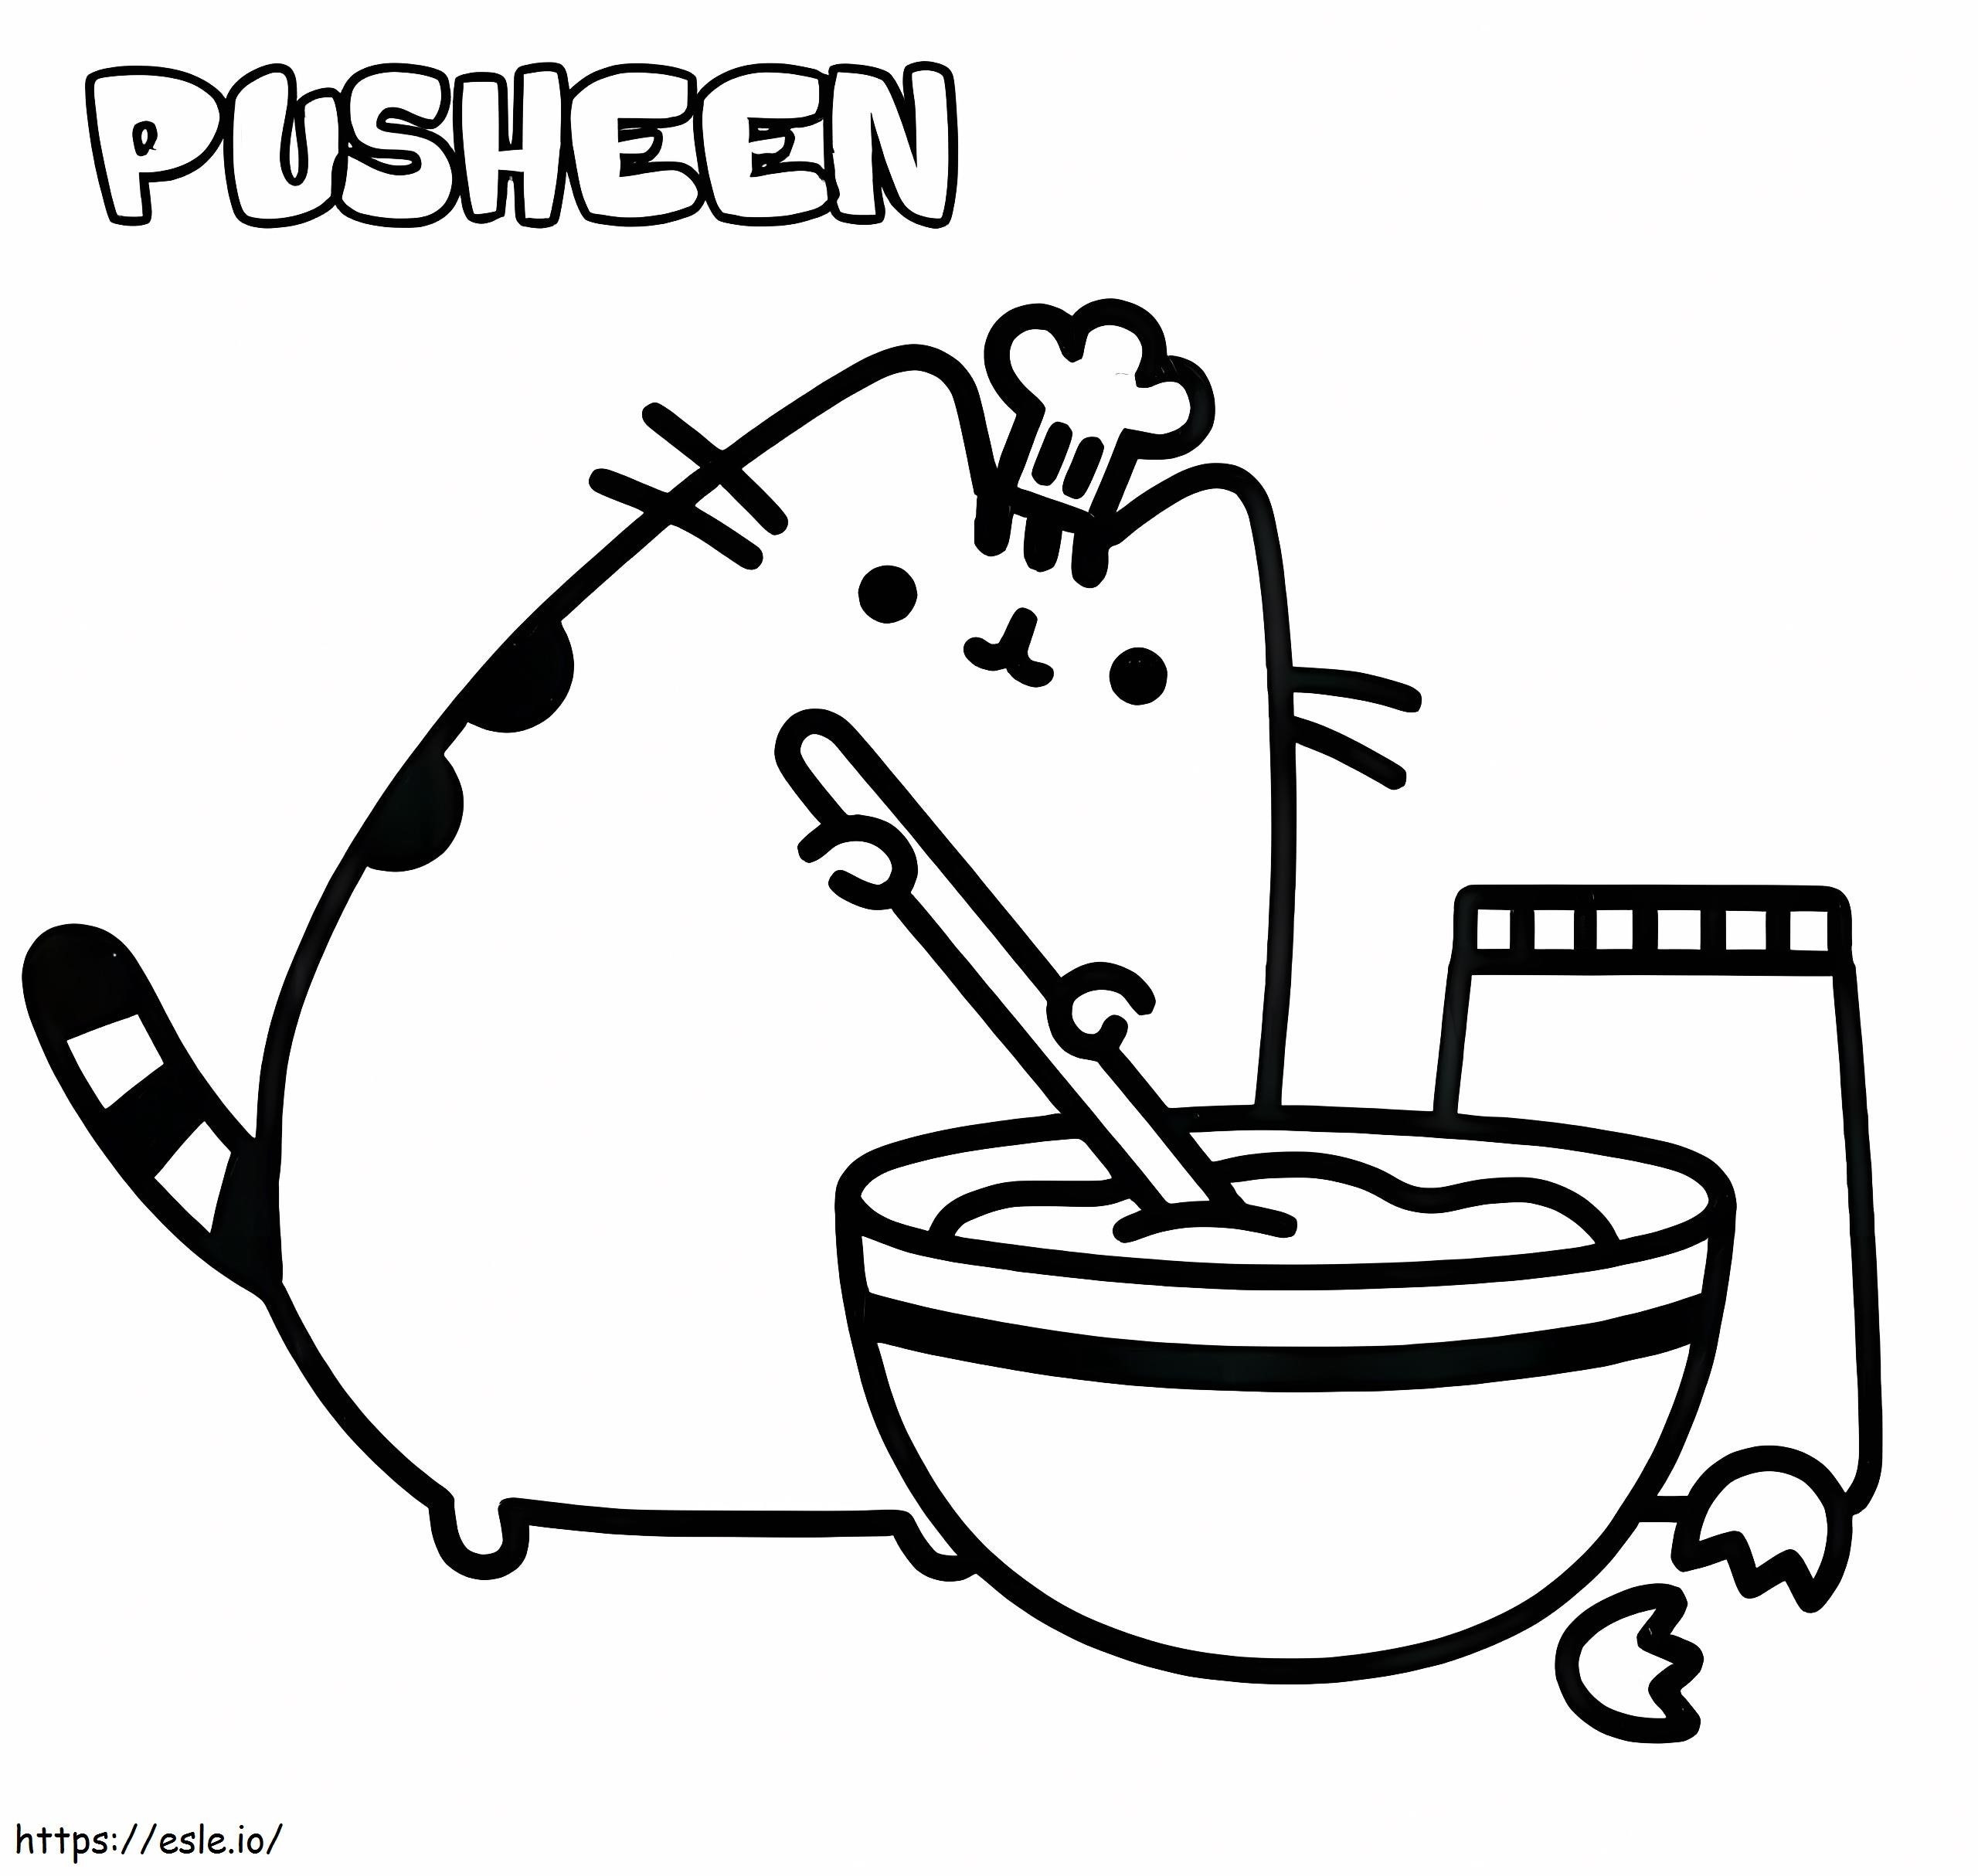 Chef Pusheen Makes Cakes coloring page